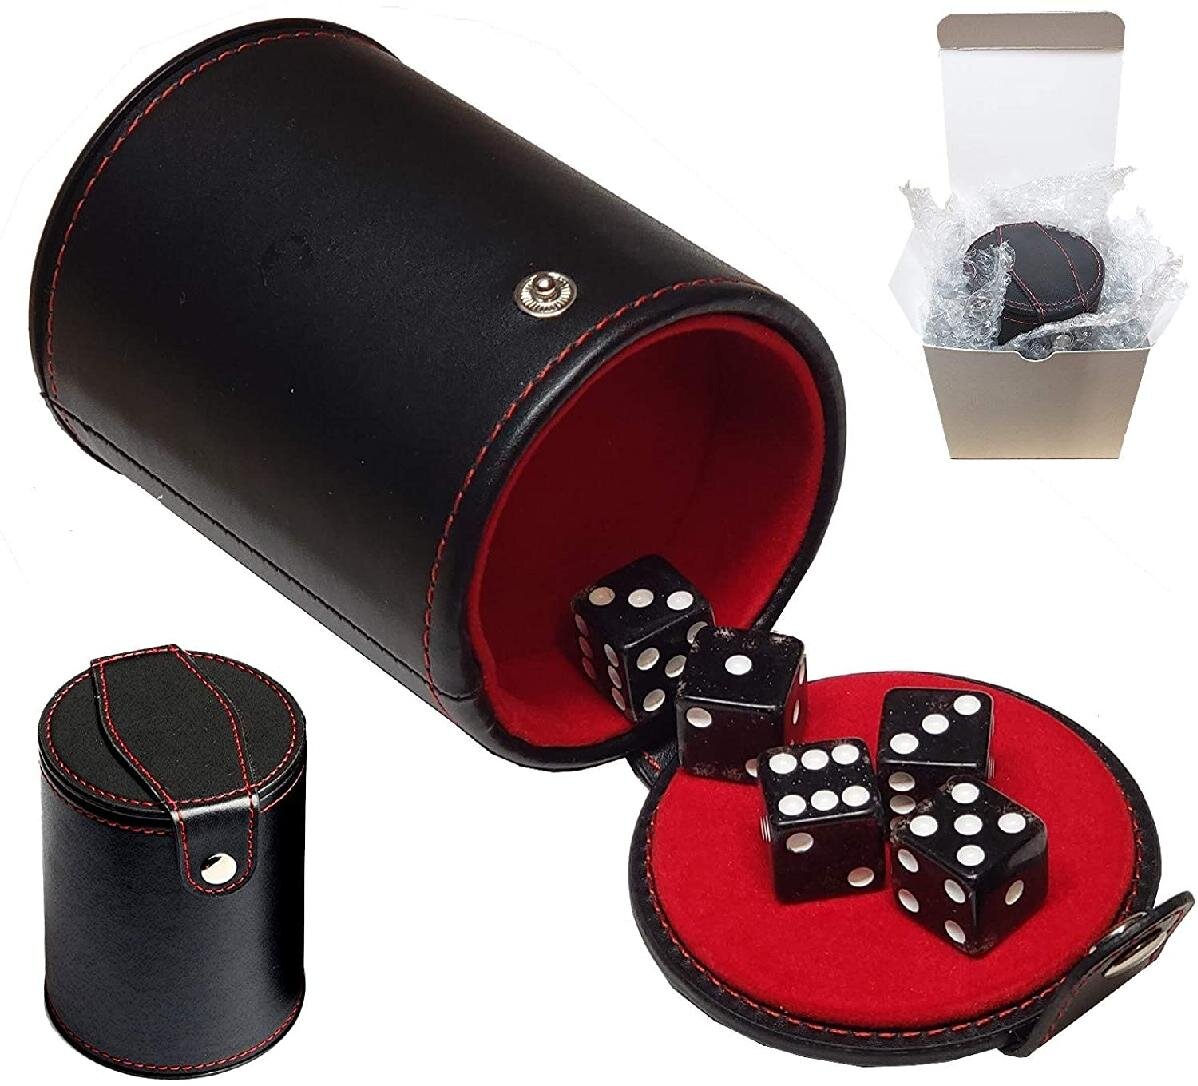 Dice Cup Black Leatherette and 5 Poker Dice With Storage Compartment 